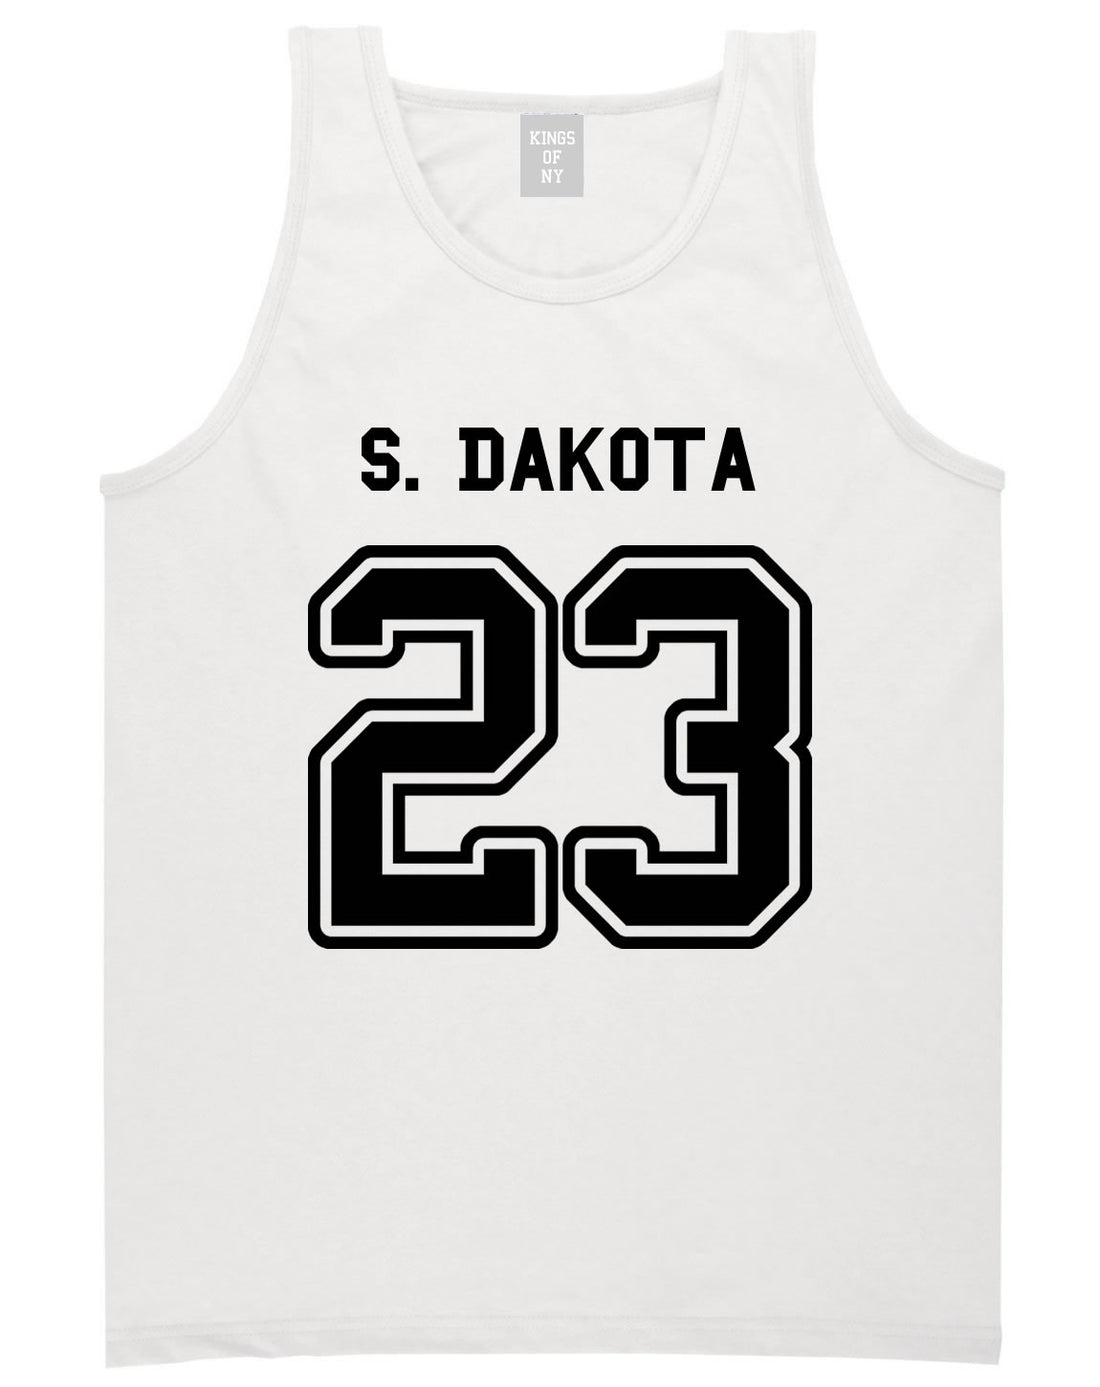 Sport Style South Dakota 23 Team State Jersey Mens Tank Top By Kings Of NY